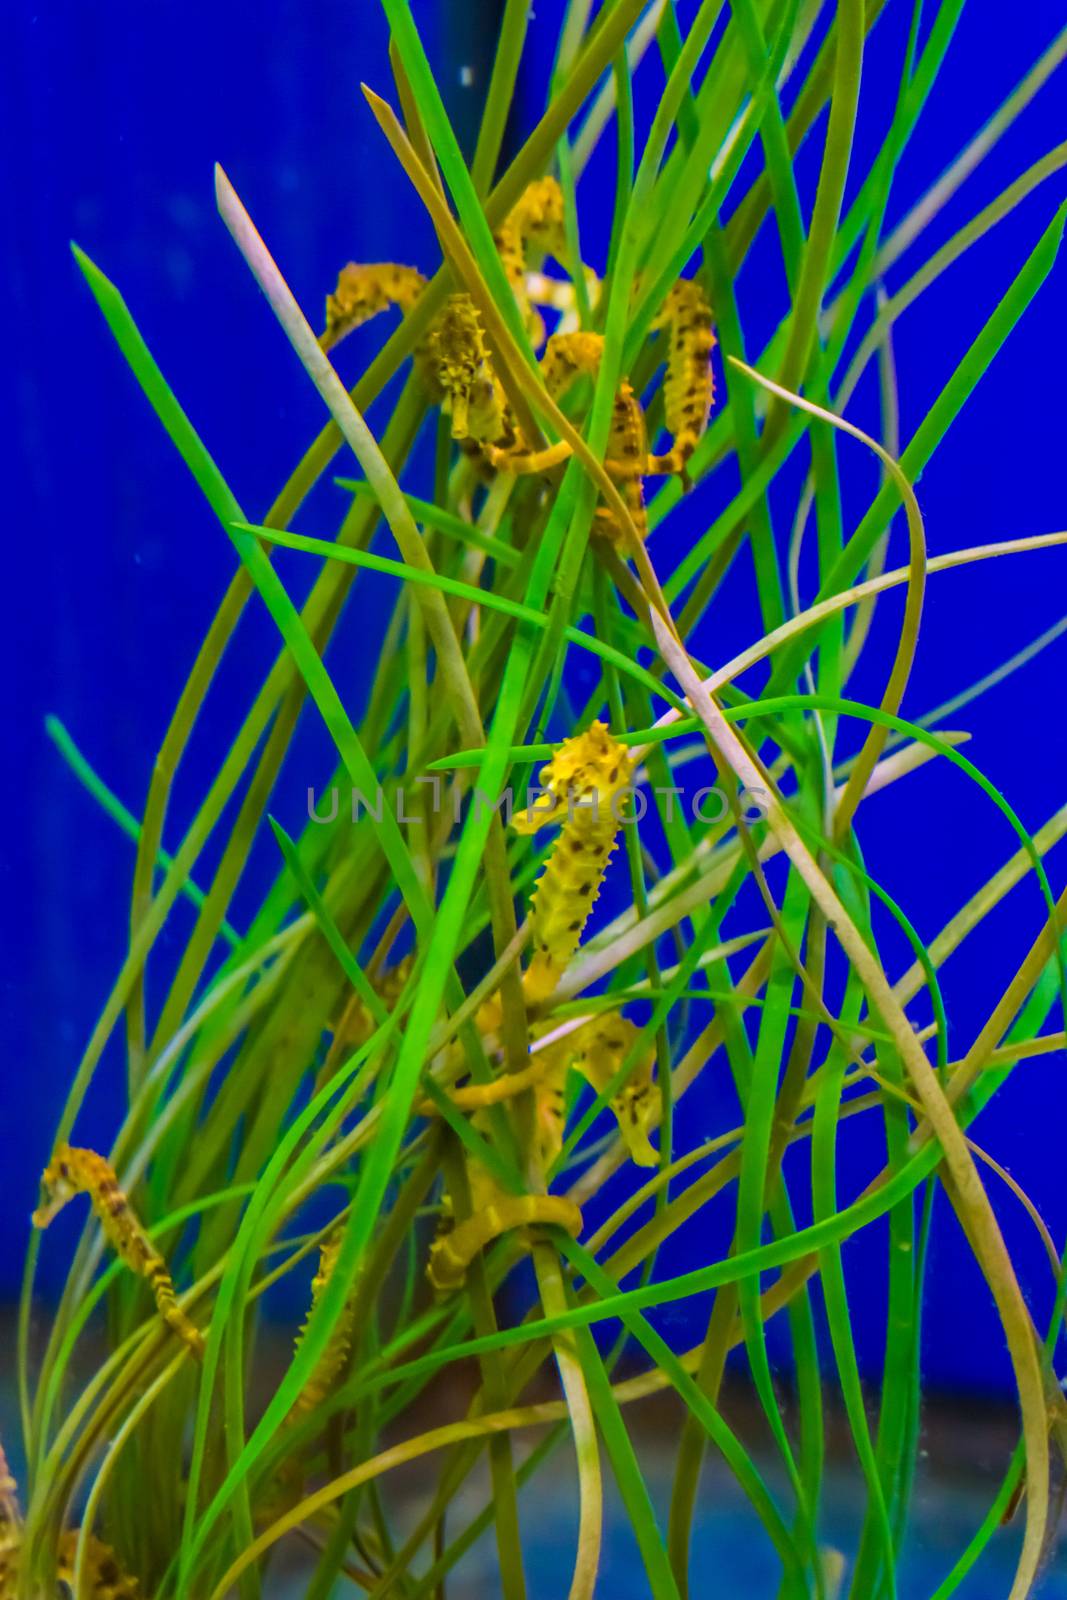 family of common estuary yellow seahorses hanging around in some seaweed grass by charlottebleijenberg